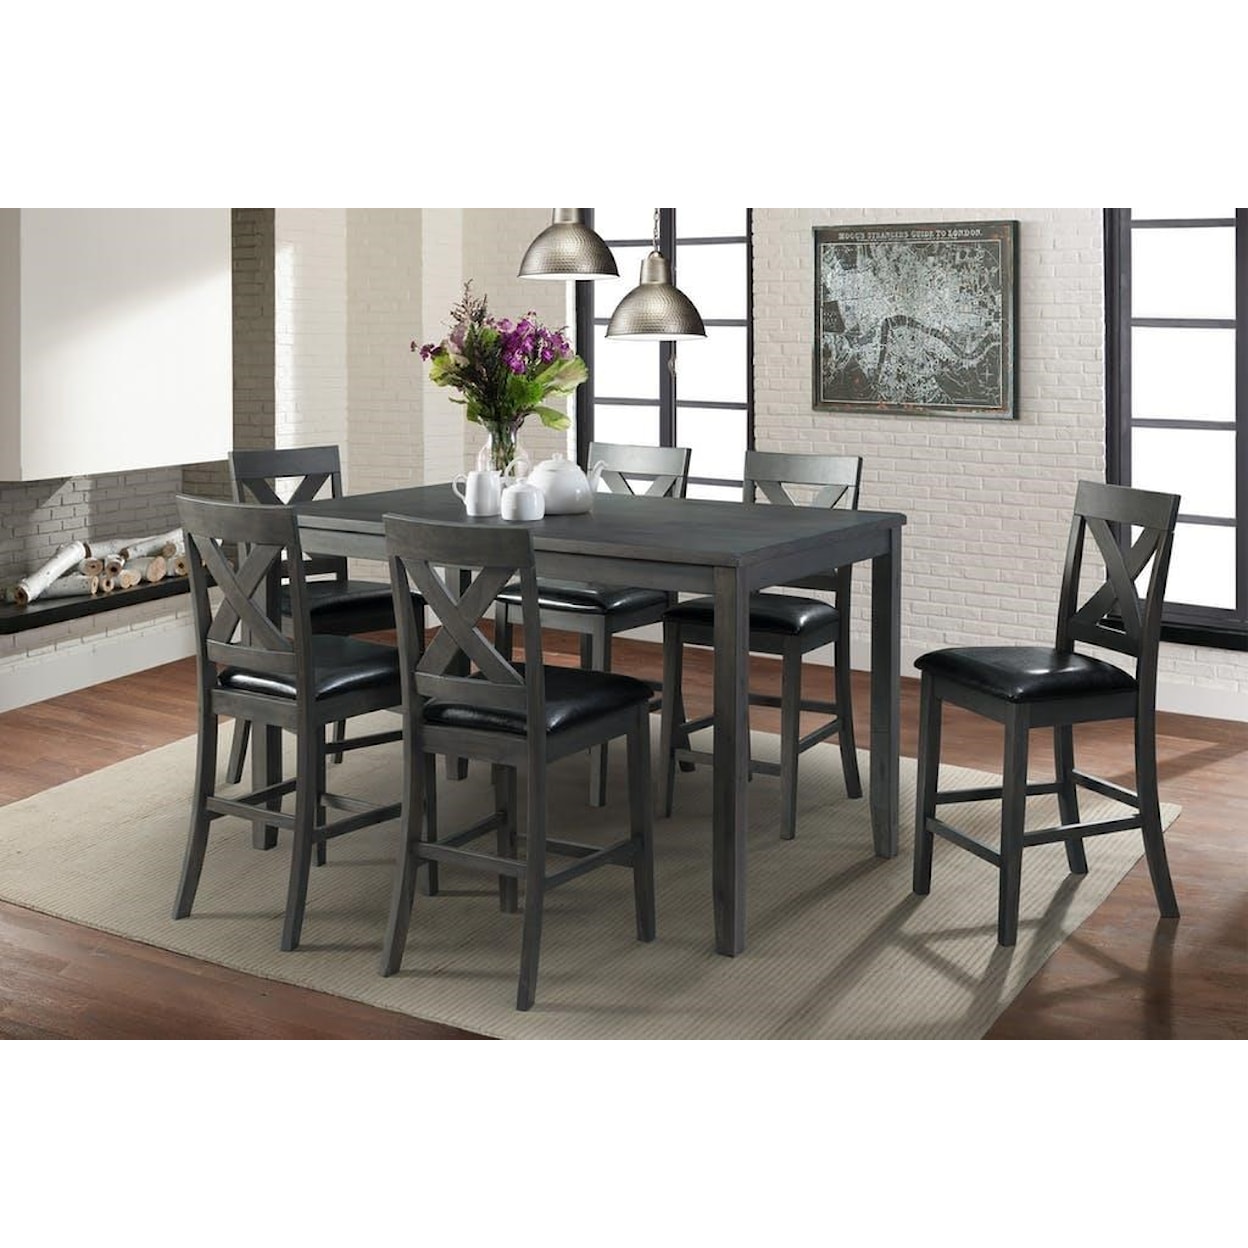 Elements Alex Gray 7 Pc Dining Group